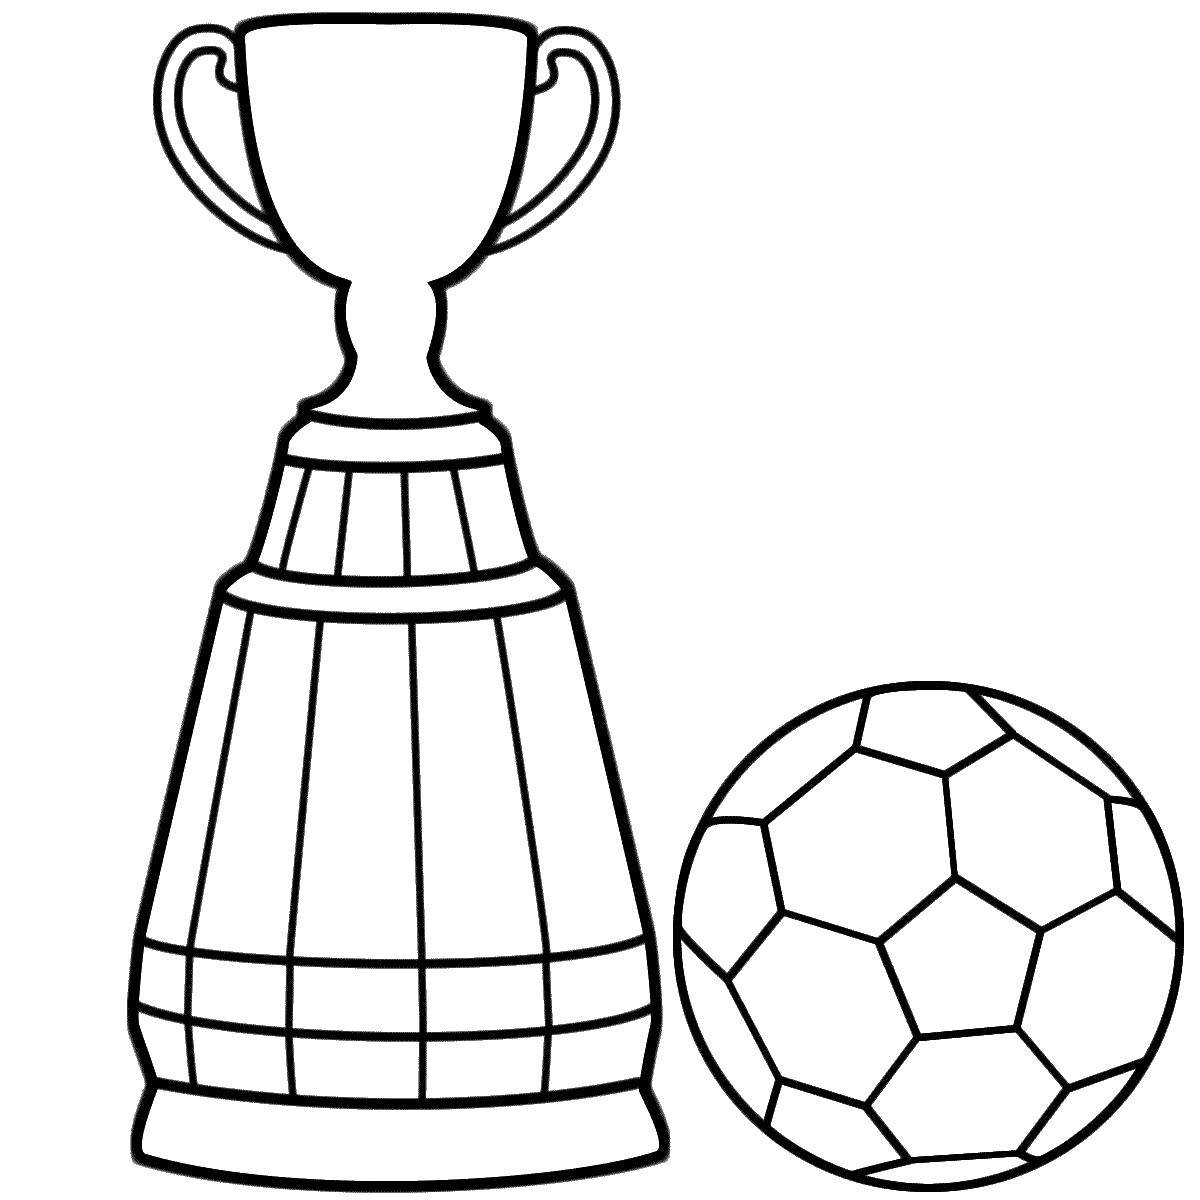 Coloring The Cup with the ball. Category Football. Tags:  the Cup , the ball.